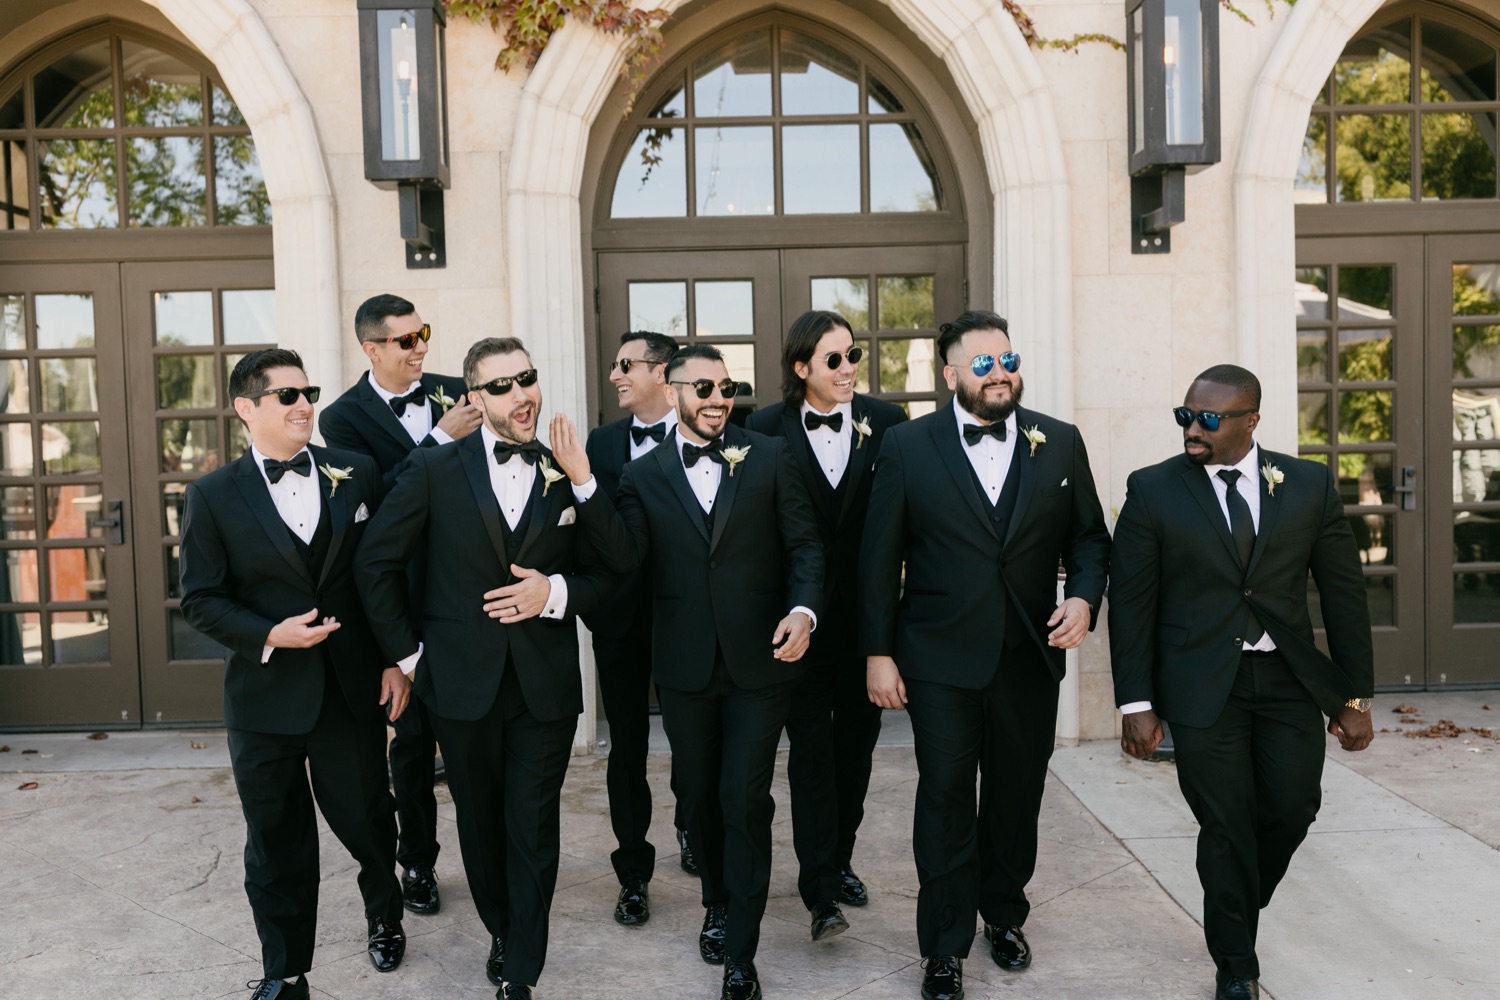 Groomsmen walking together for wedding portraits at tooth and nail winery